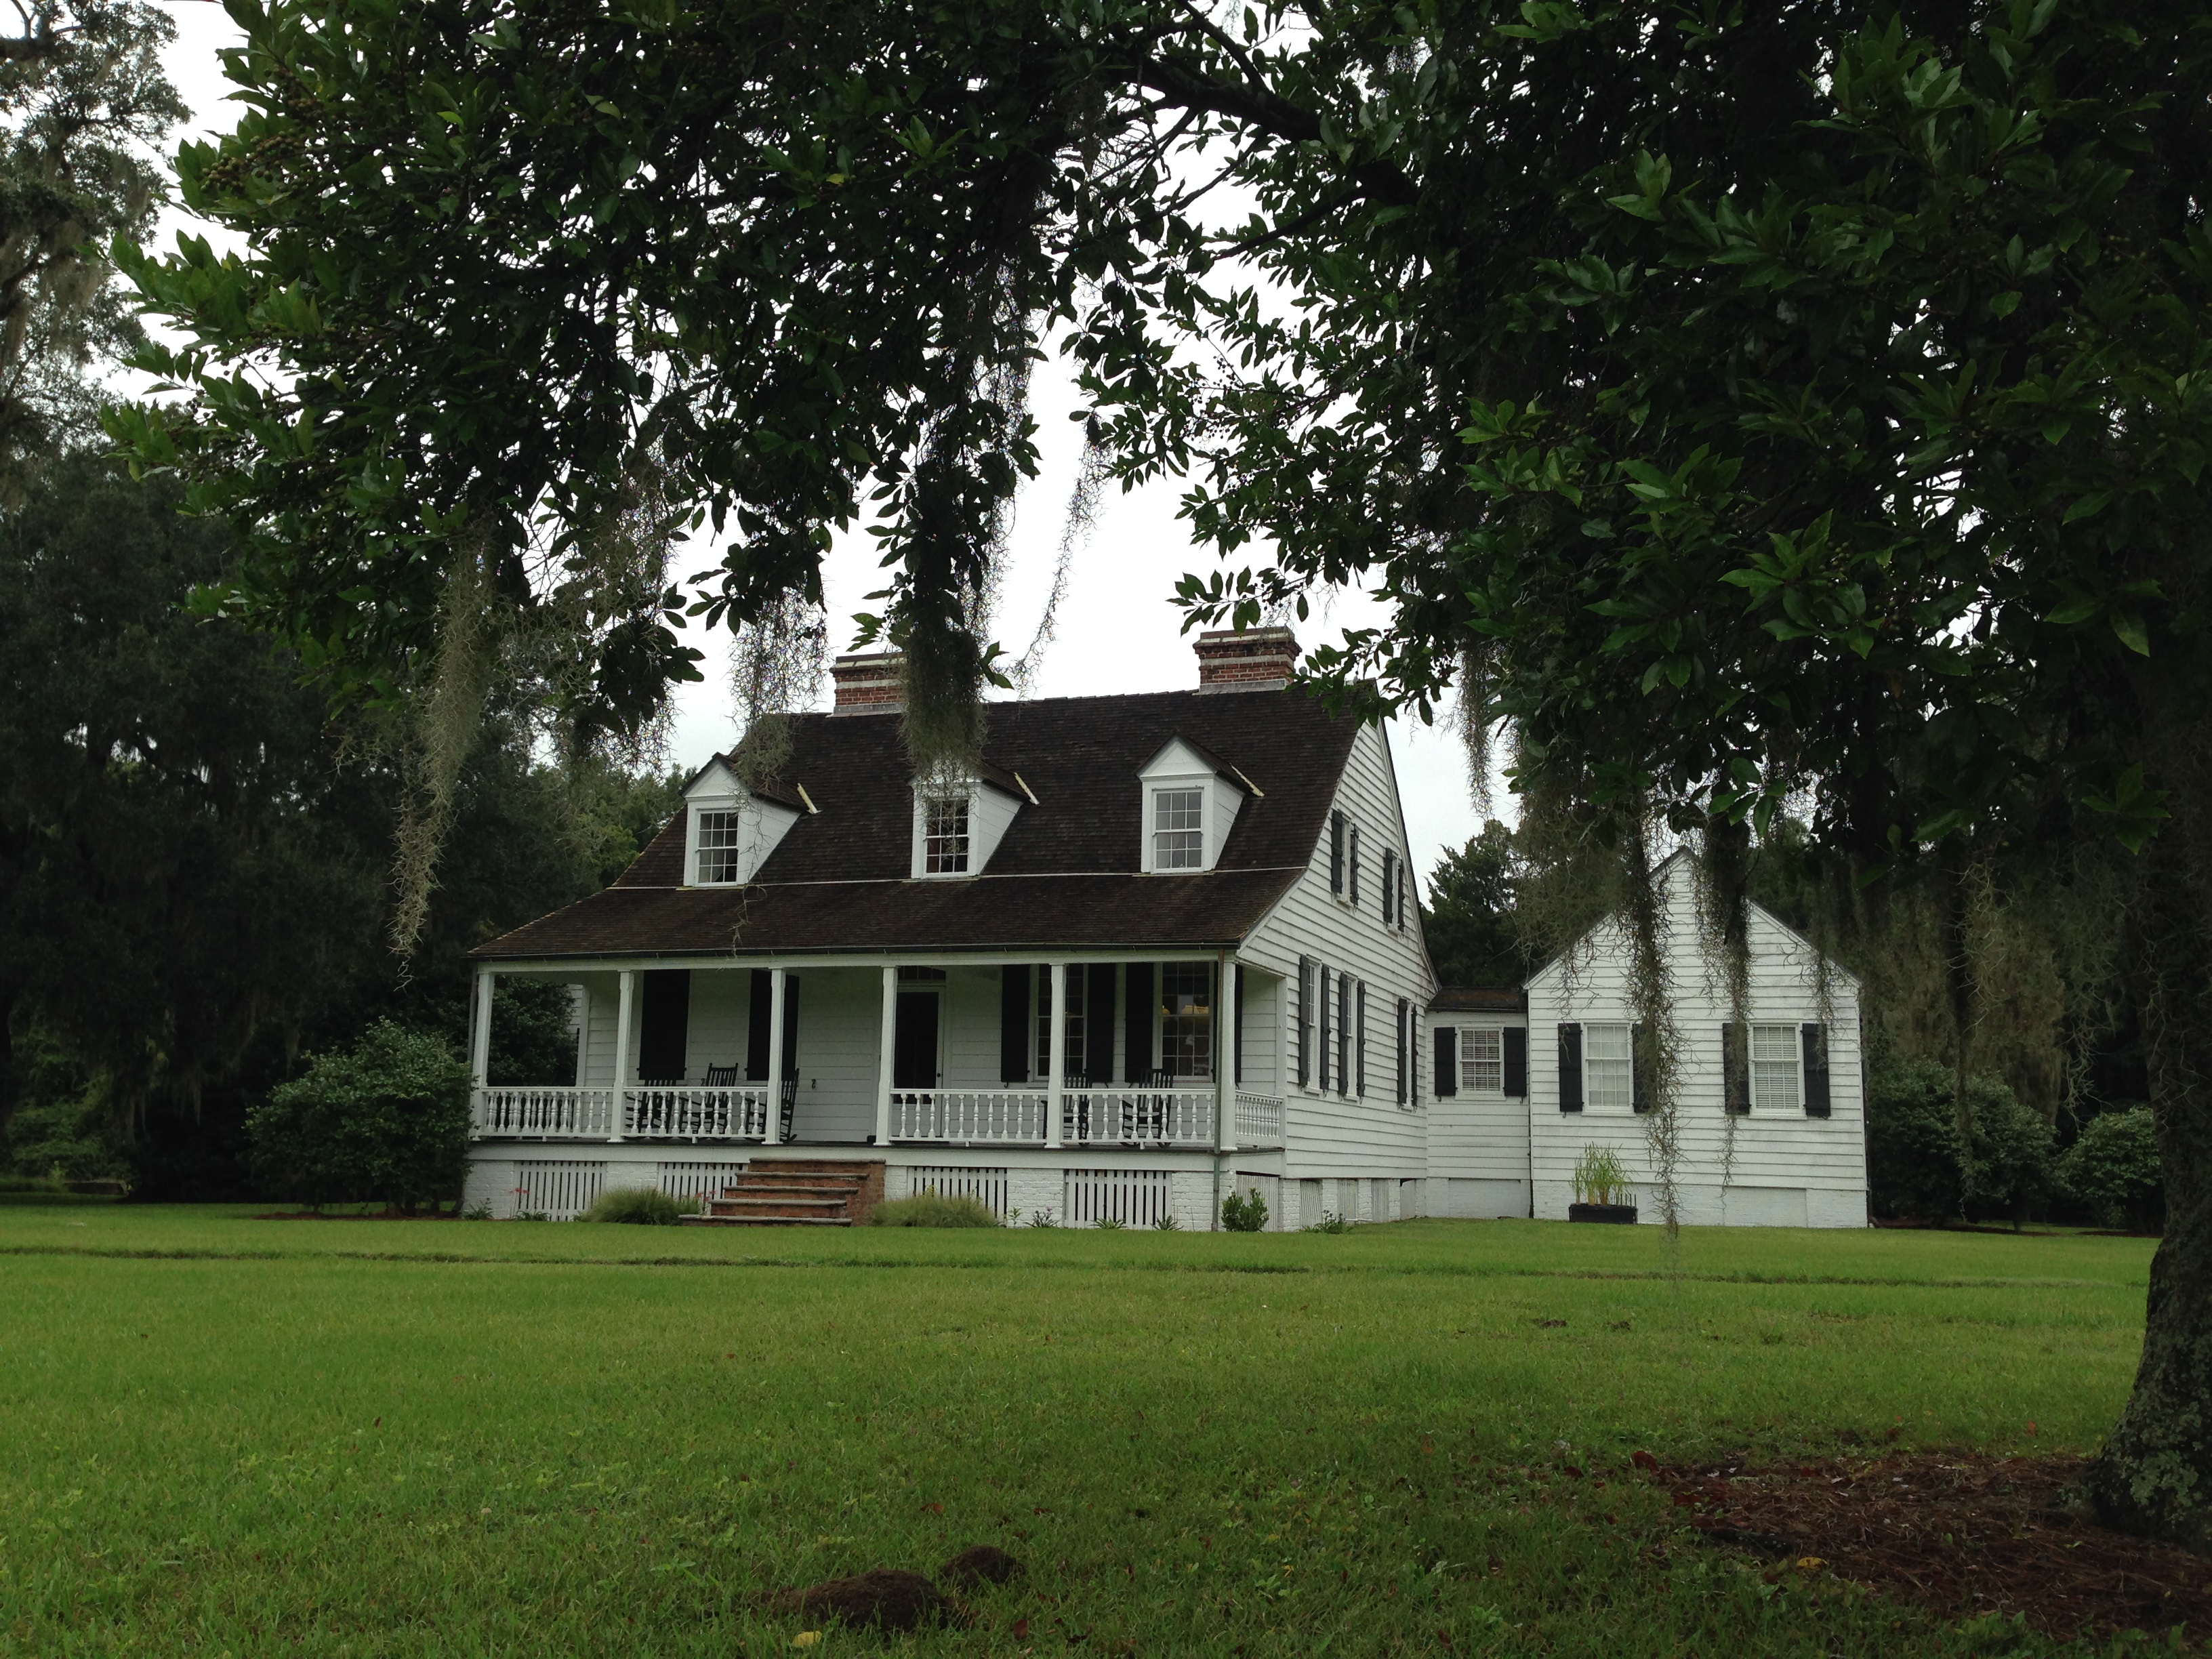 1828 Lowcountry cottage and grounds